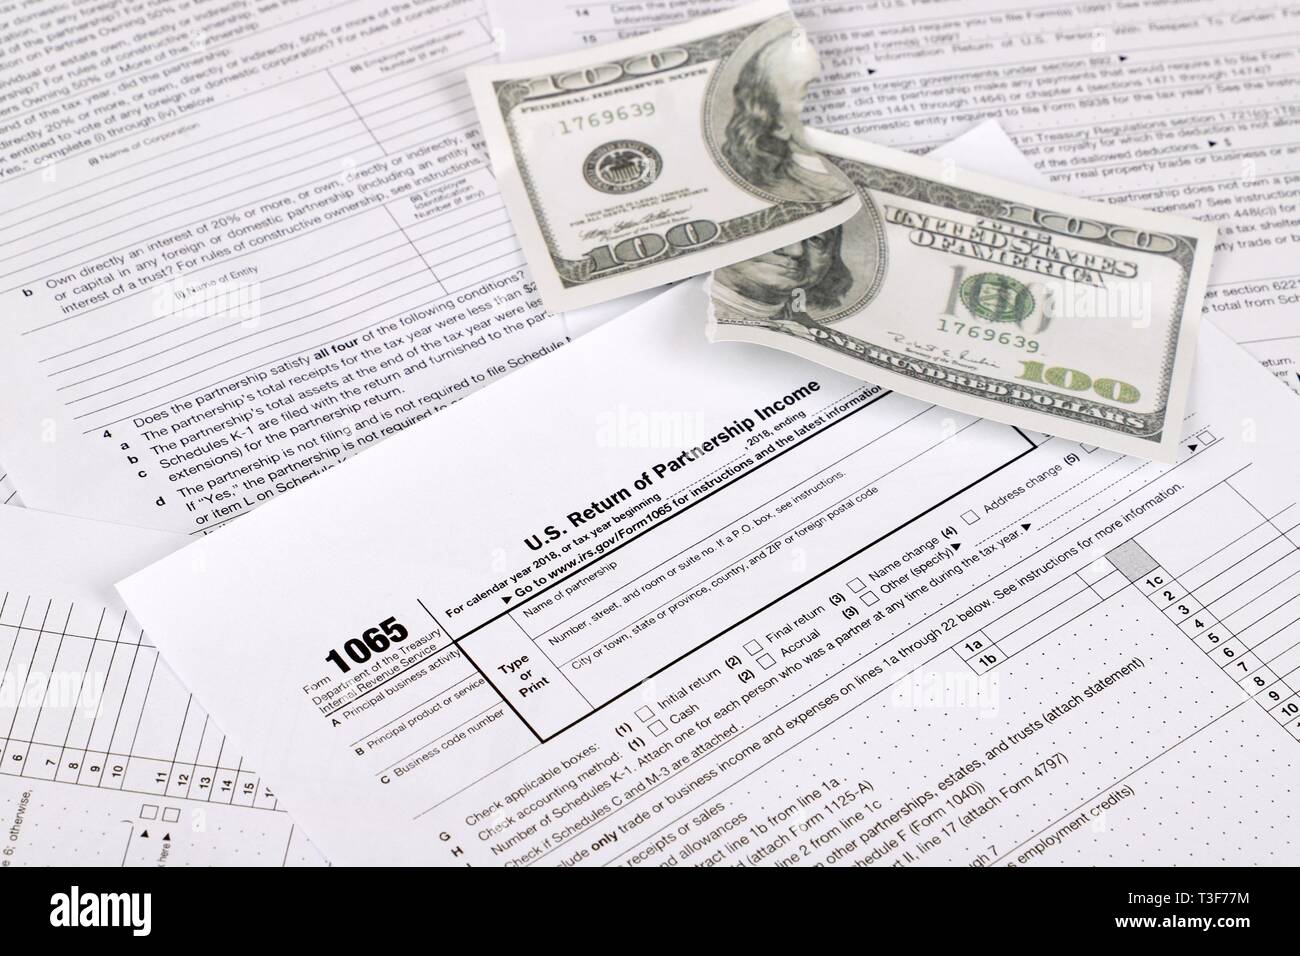 1065 tax form lies near shredded hundred dollar bill on a Table. US Return for parentship income Stock Photo